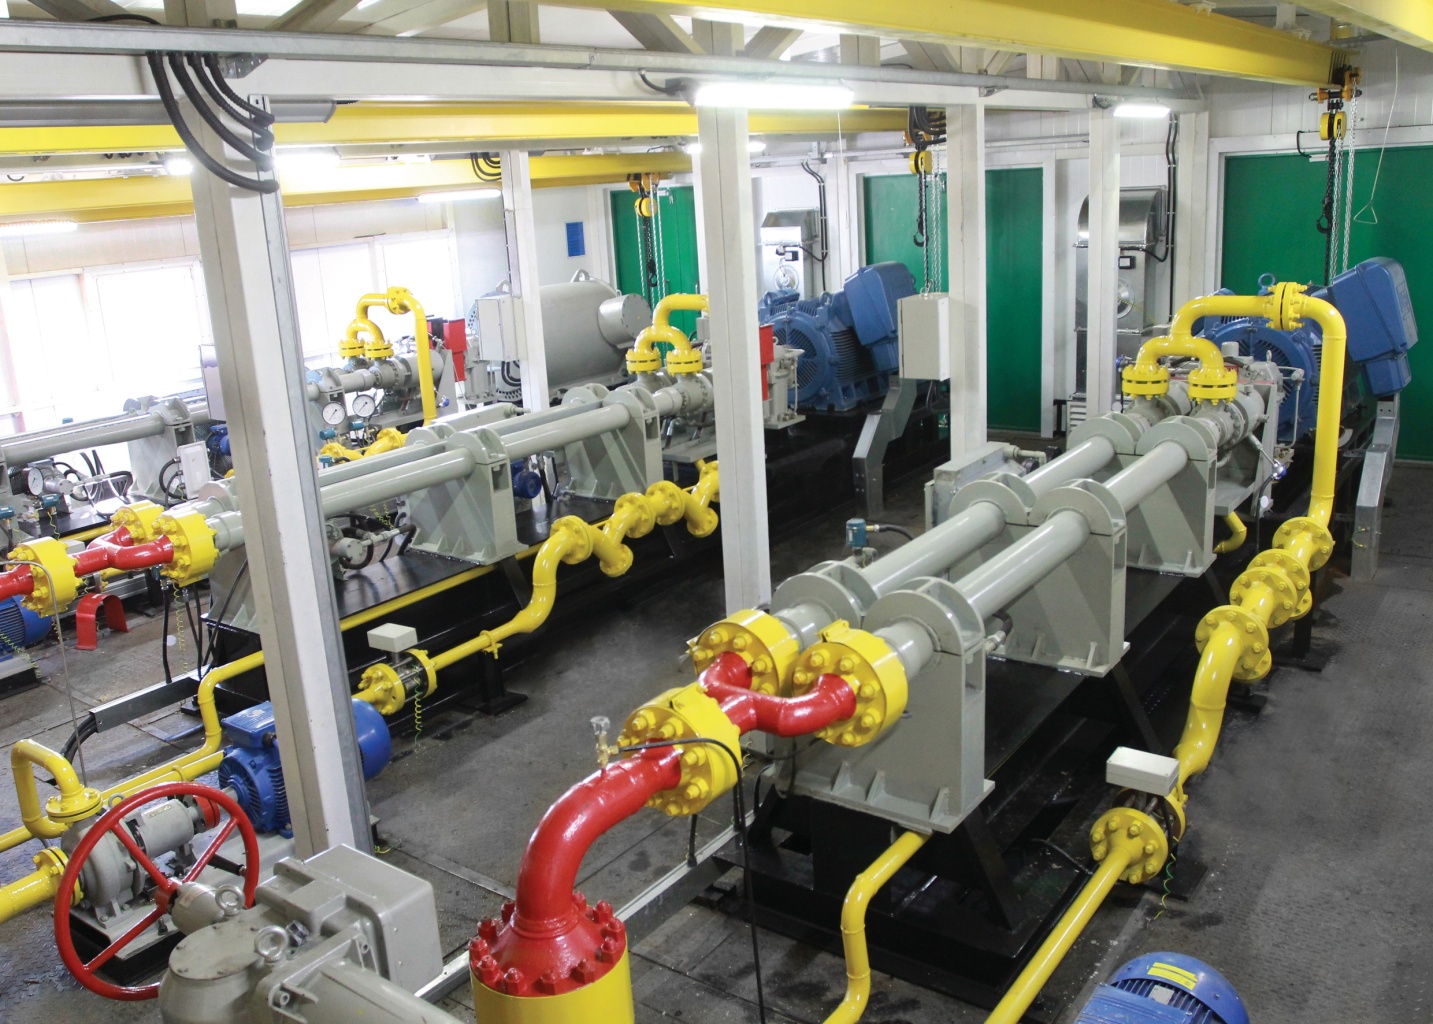 Modular cluster pumping stations